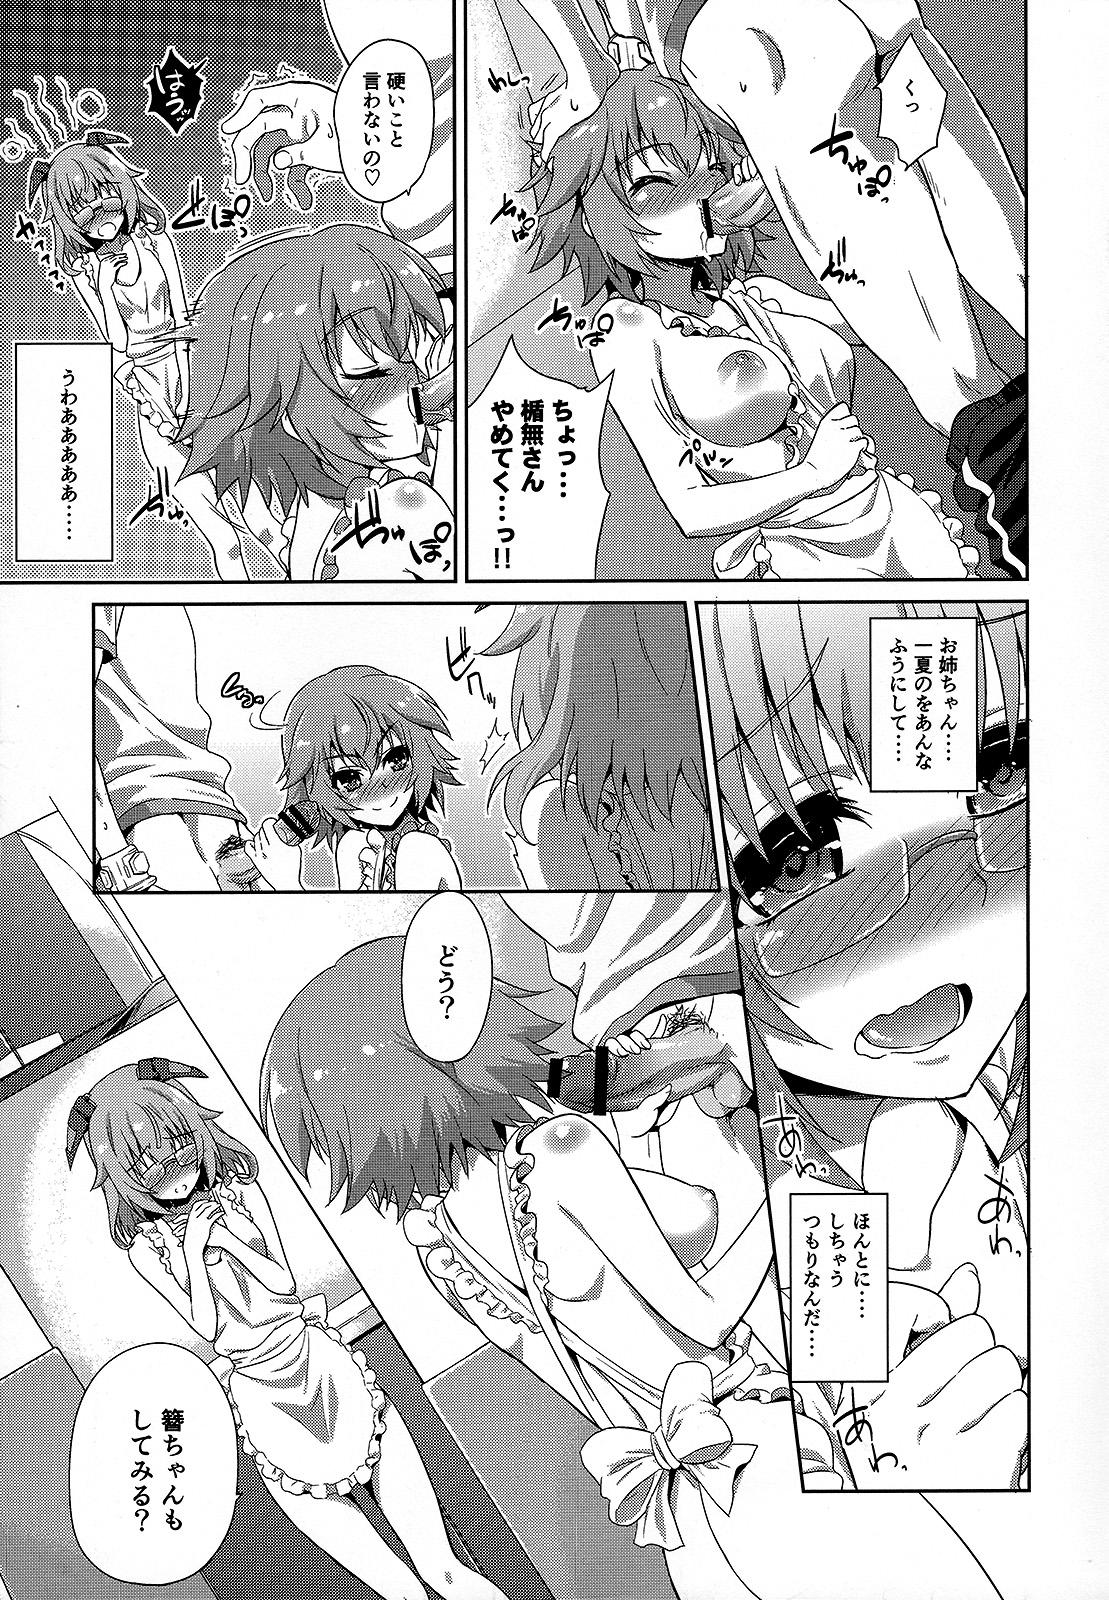 Amature Porn IS ICHIKA LOVE SISTERS!! - Infinite stratos Teen Blowjob - Page 6